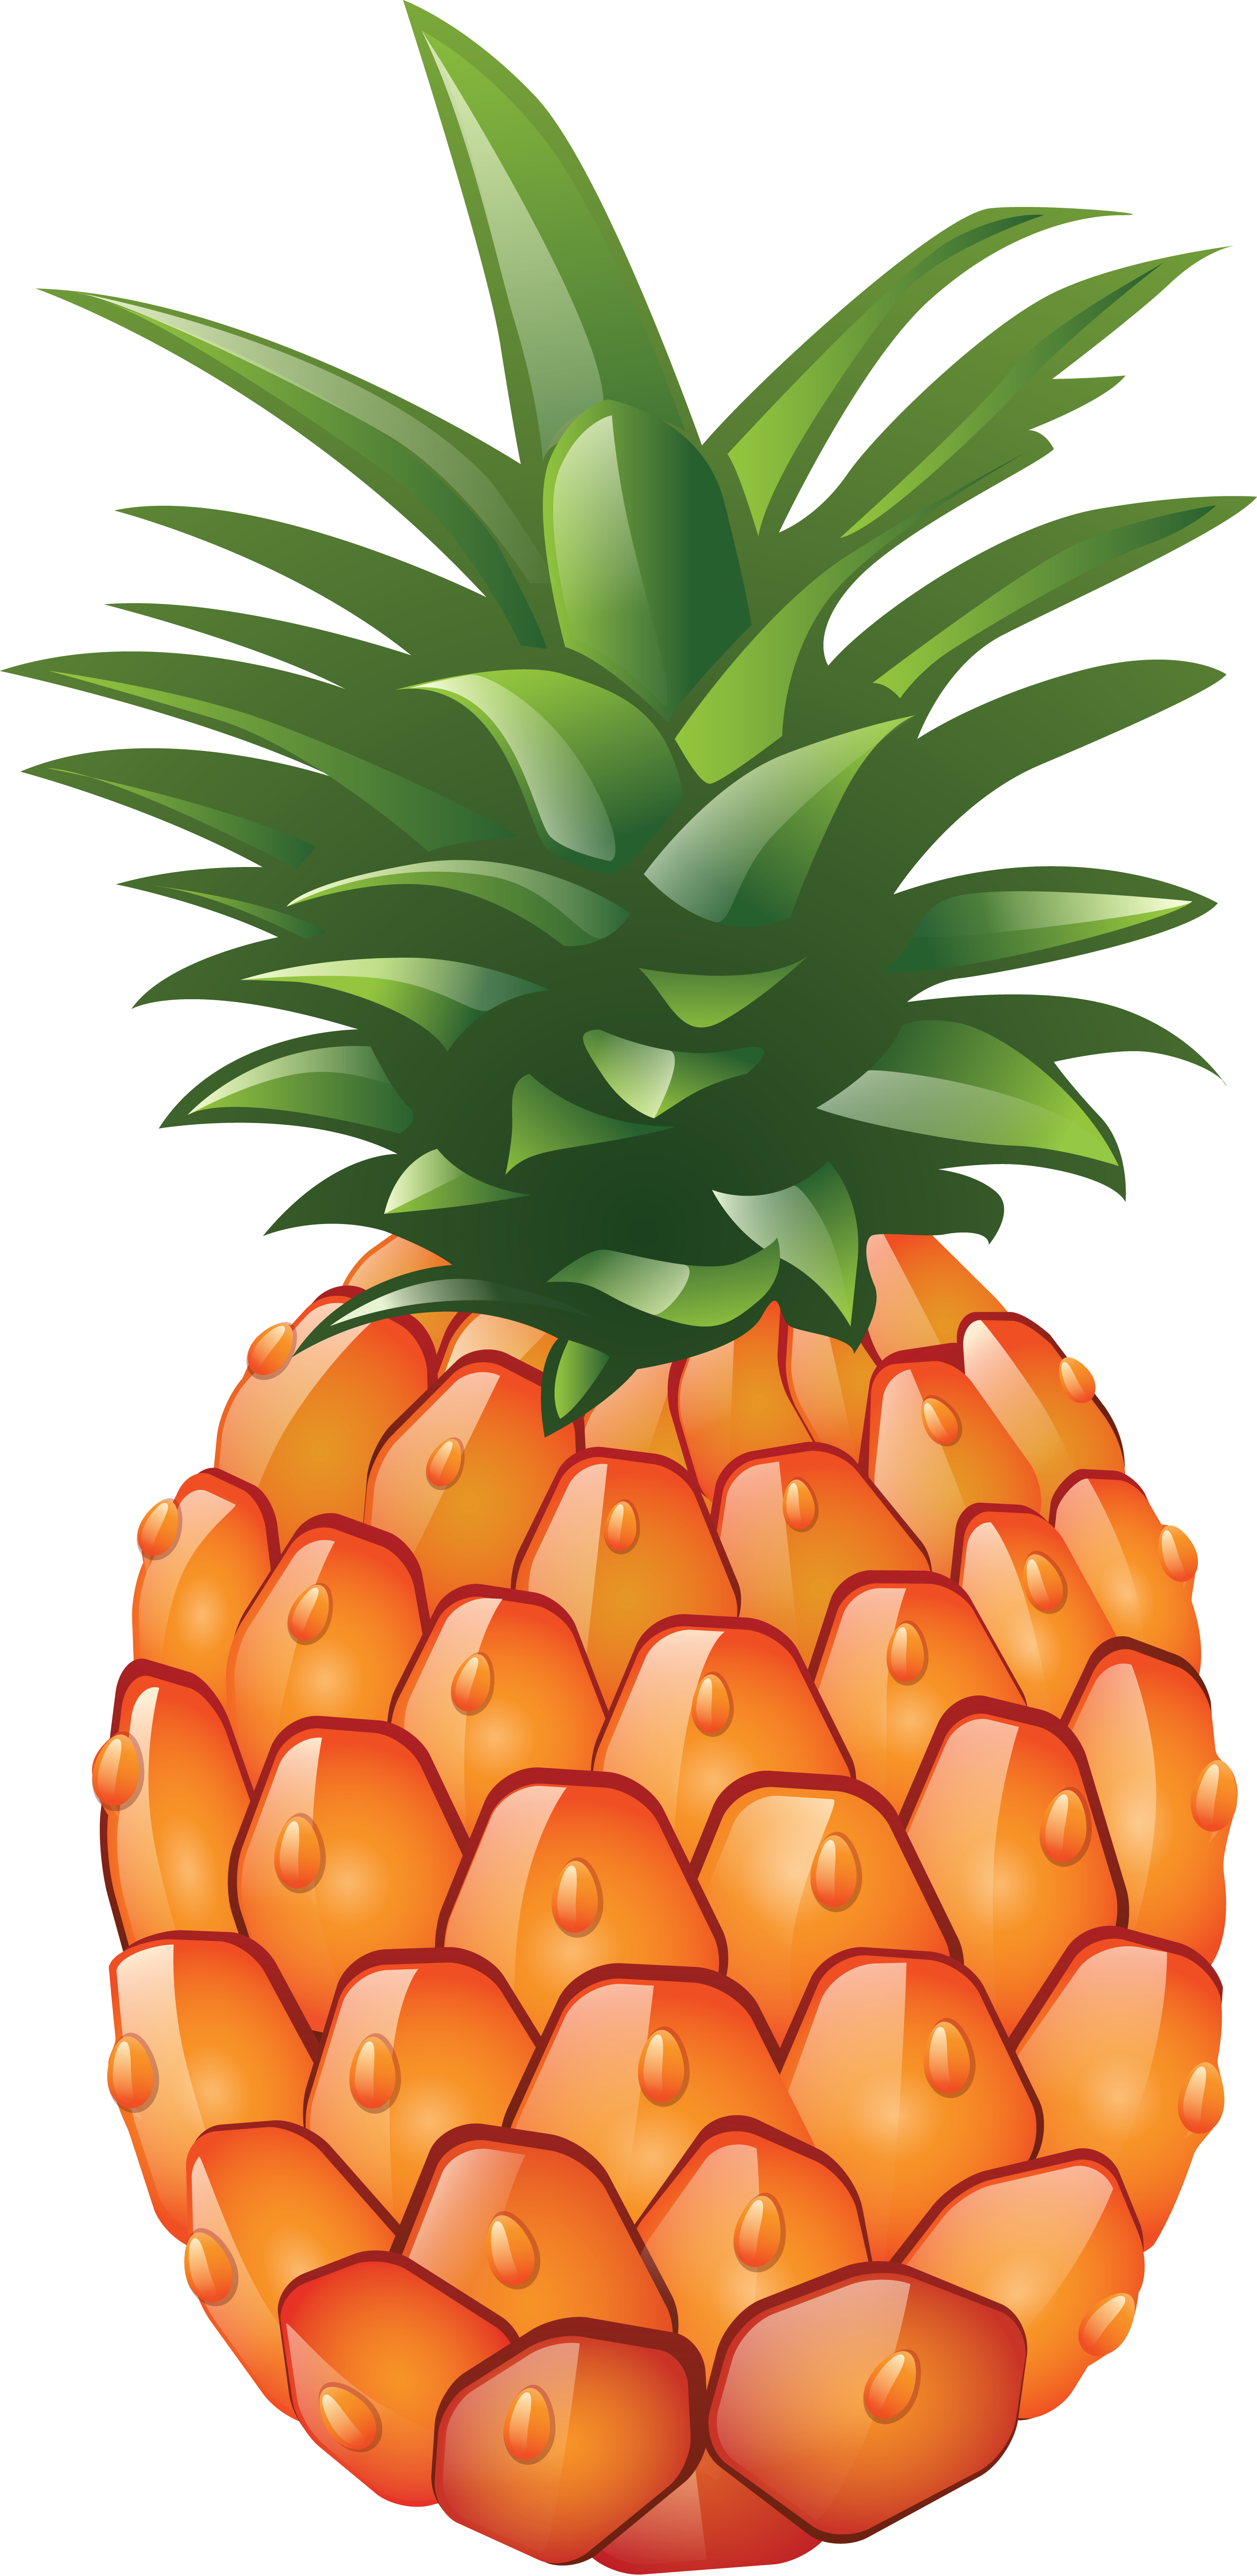 Png image free download. Clipart banana pineapple